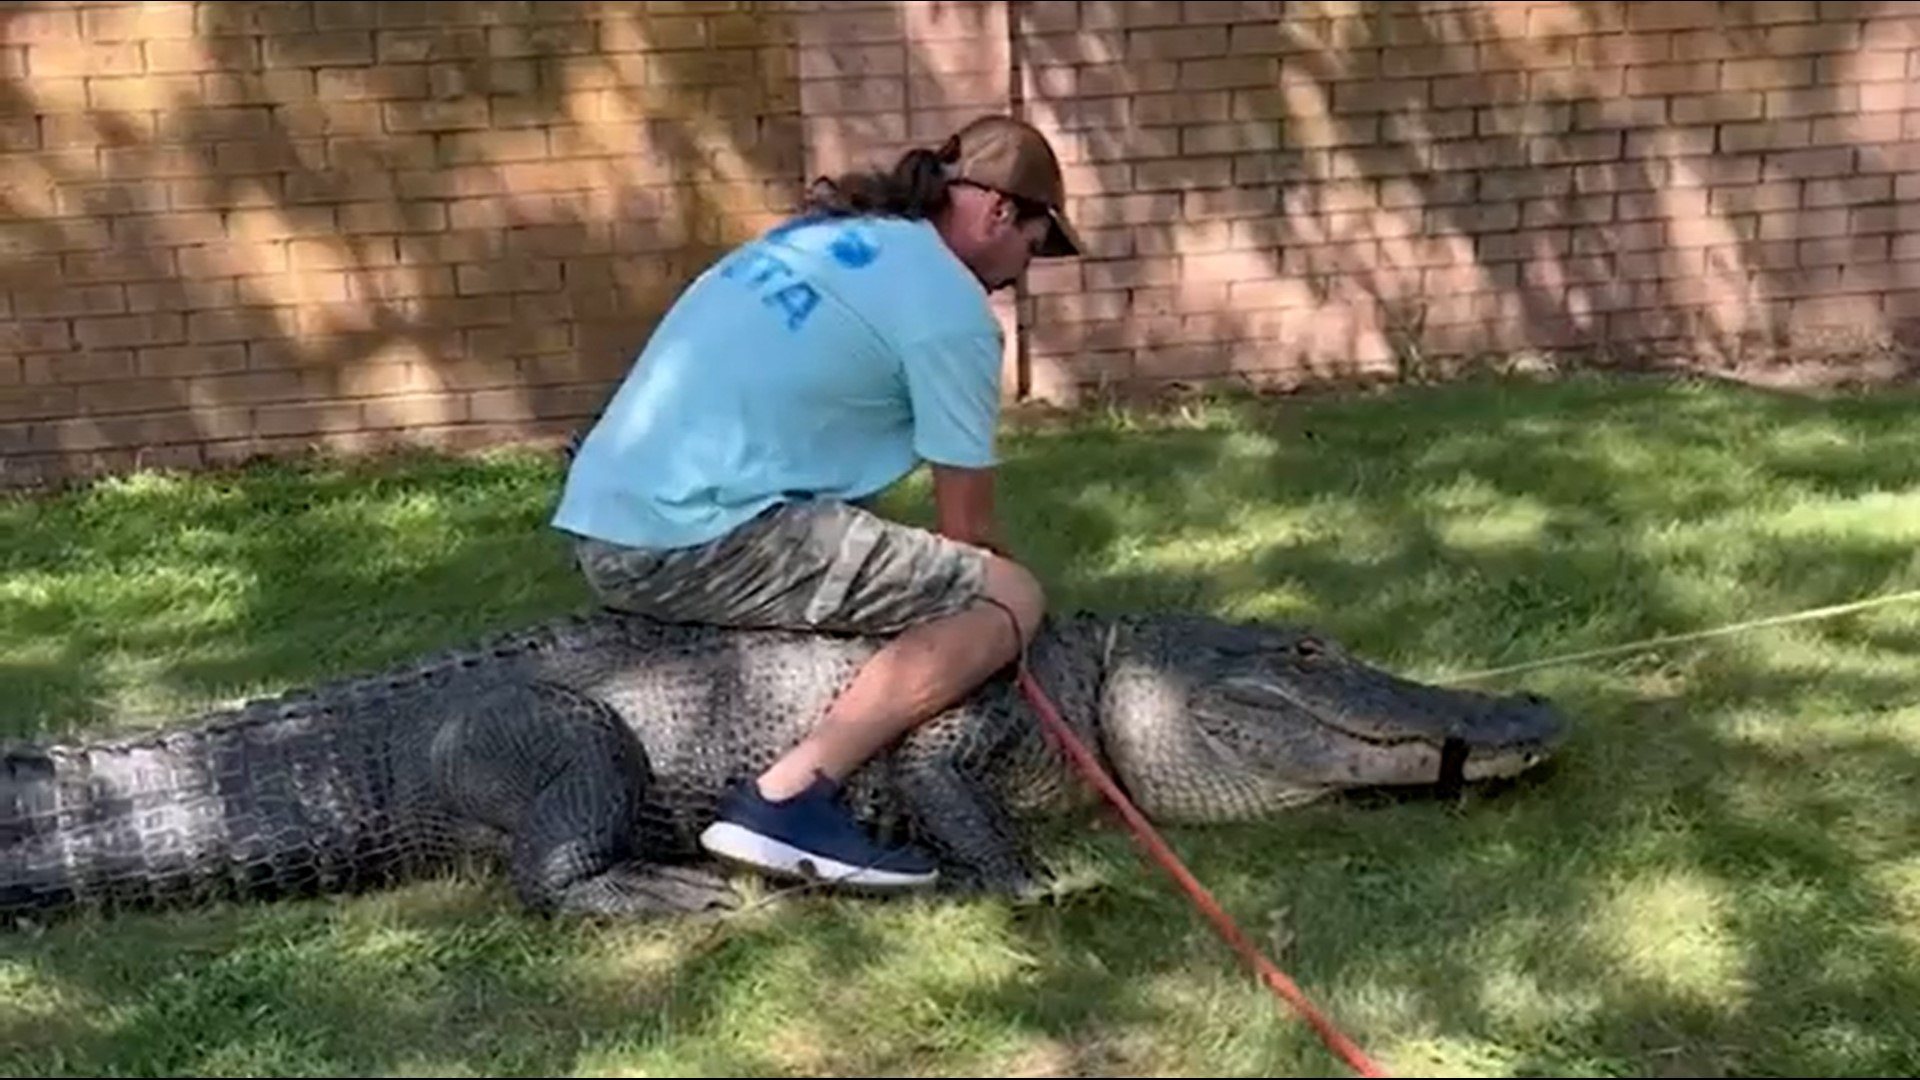 Alligators are a somehow surprising and yet expected sight in the Houston area and SE Texas. We revisit some of their more memorable visits in this KHOU 11+ special